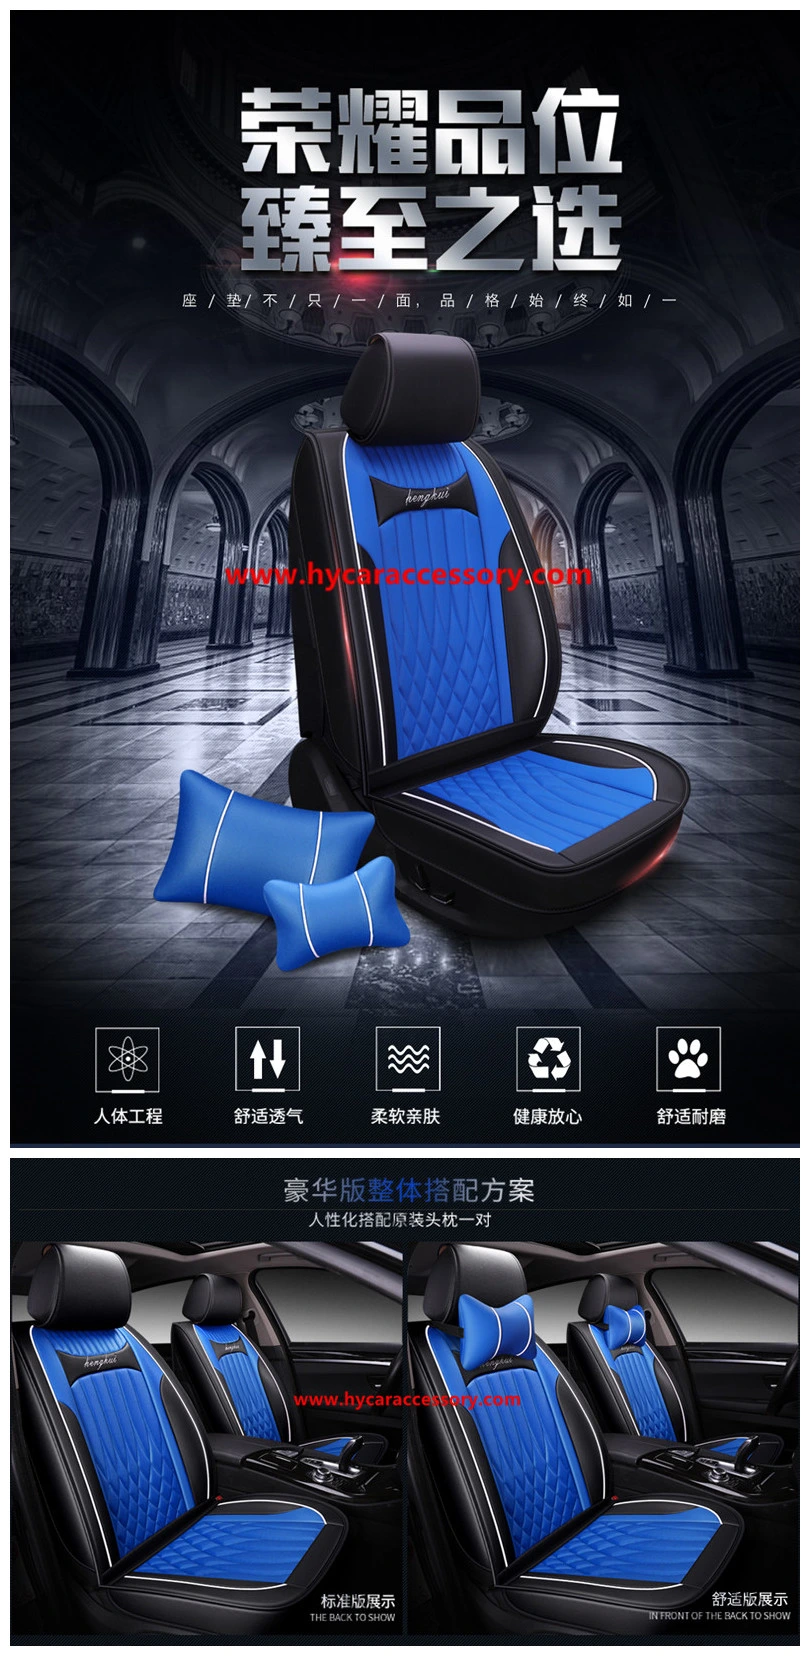 Car Accessories All Weather Seat Cushion Universal Red Black Luxury PU Leather Car Seat Cover